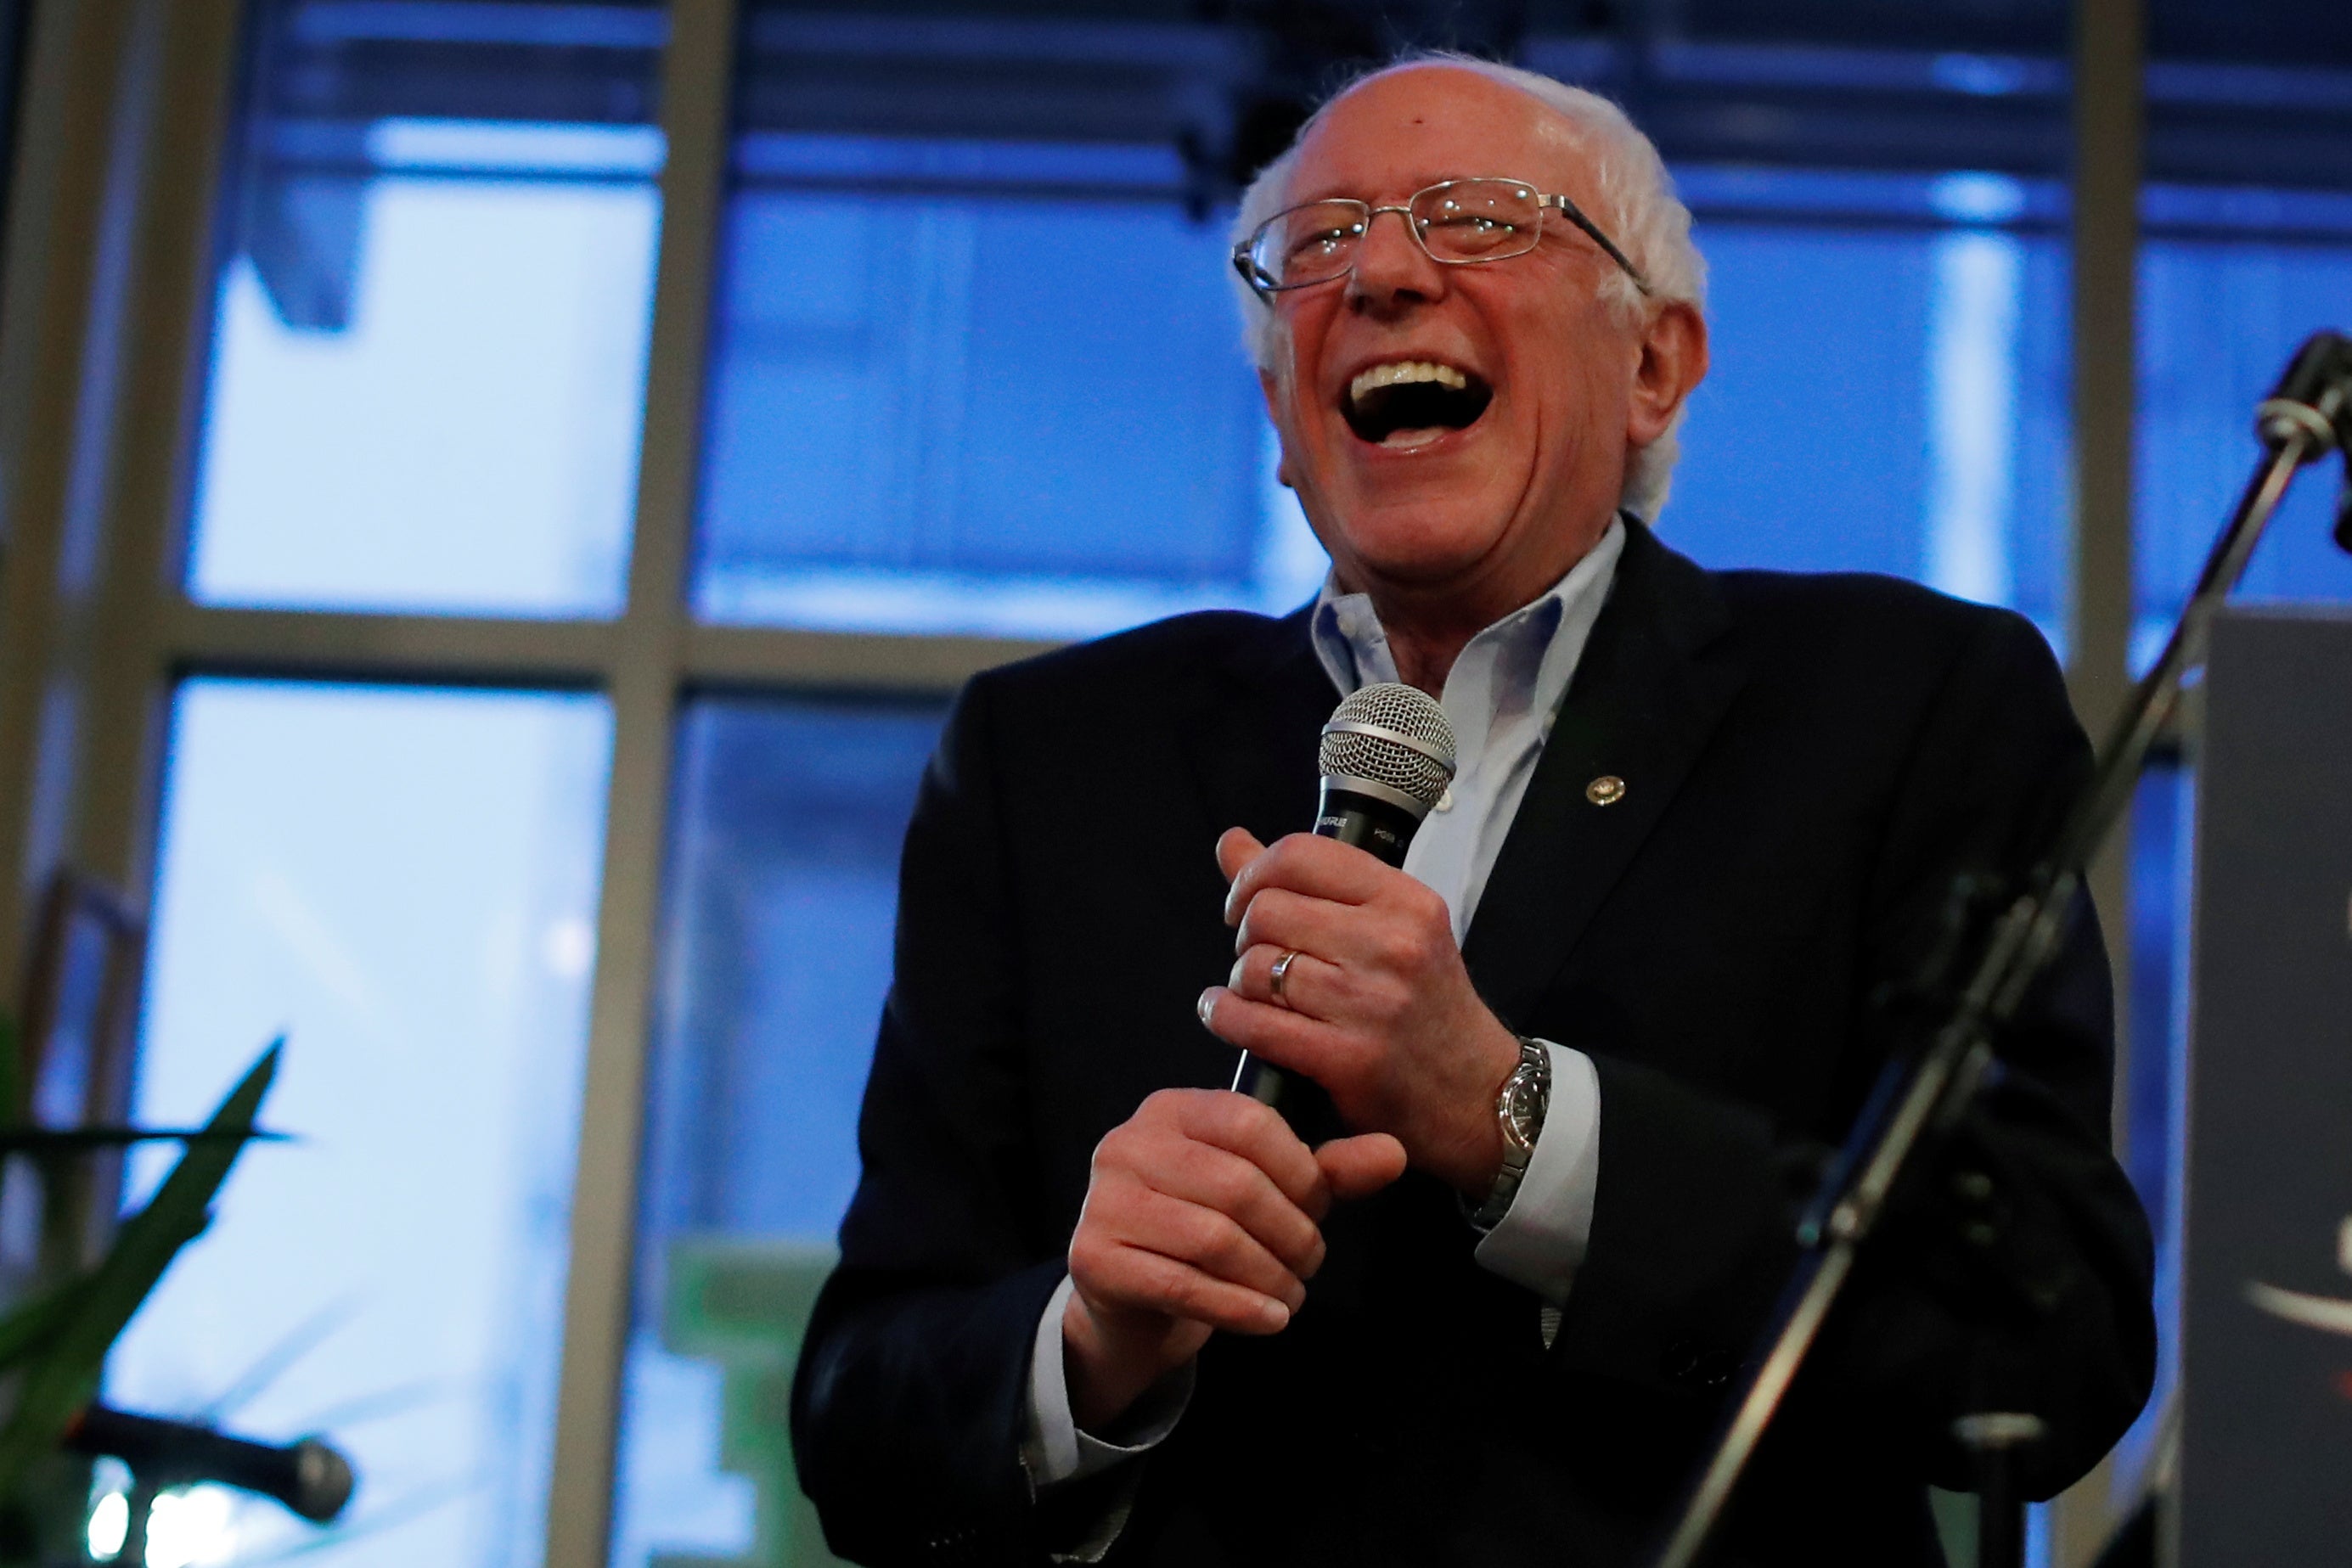 Bernie Sanders laughing while holding a mic